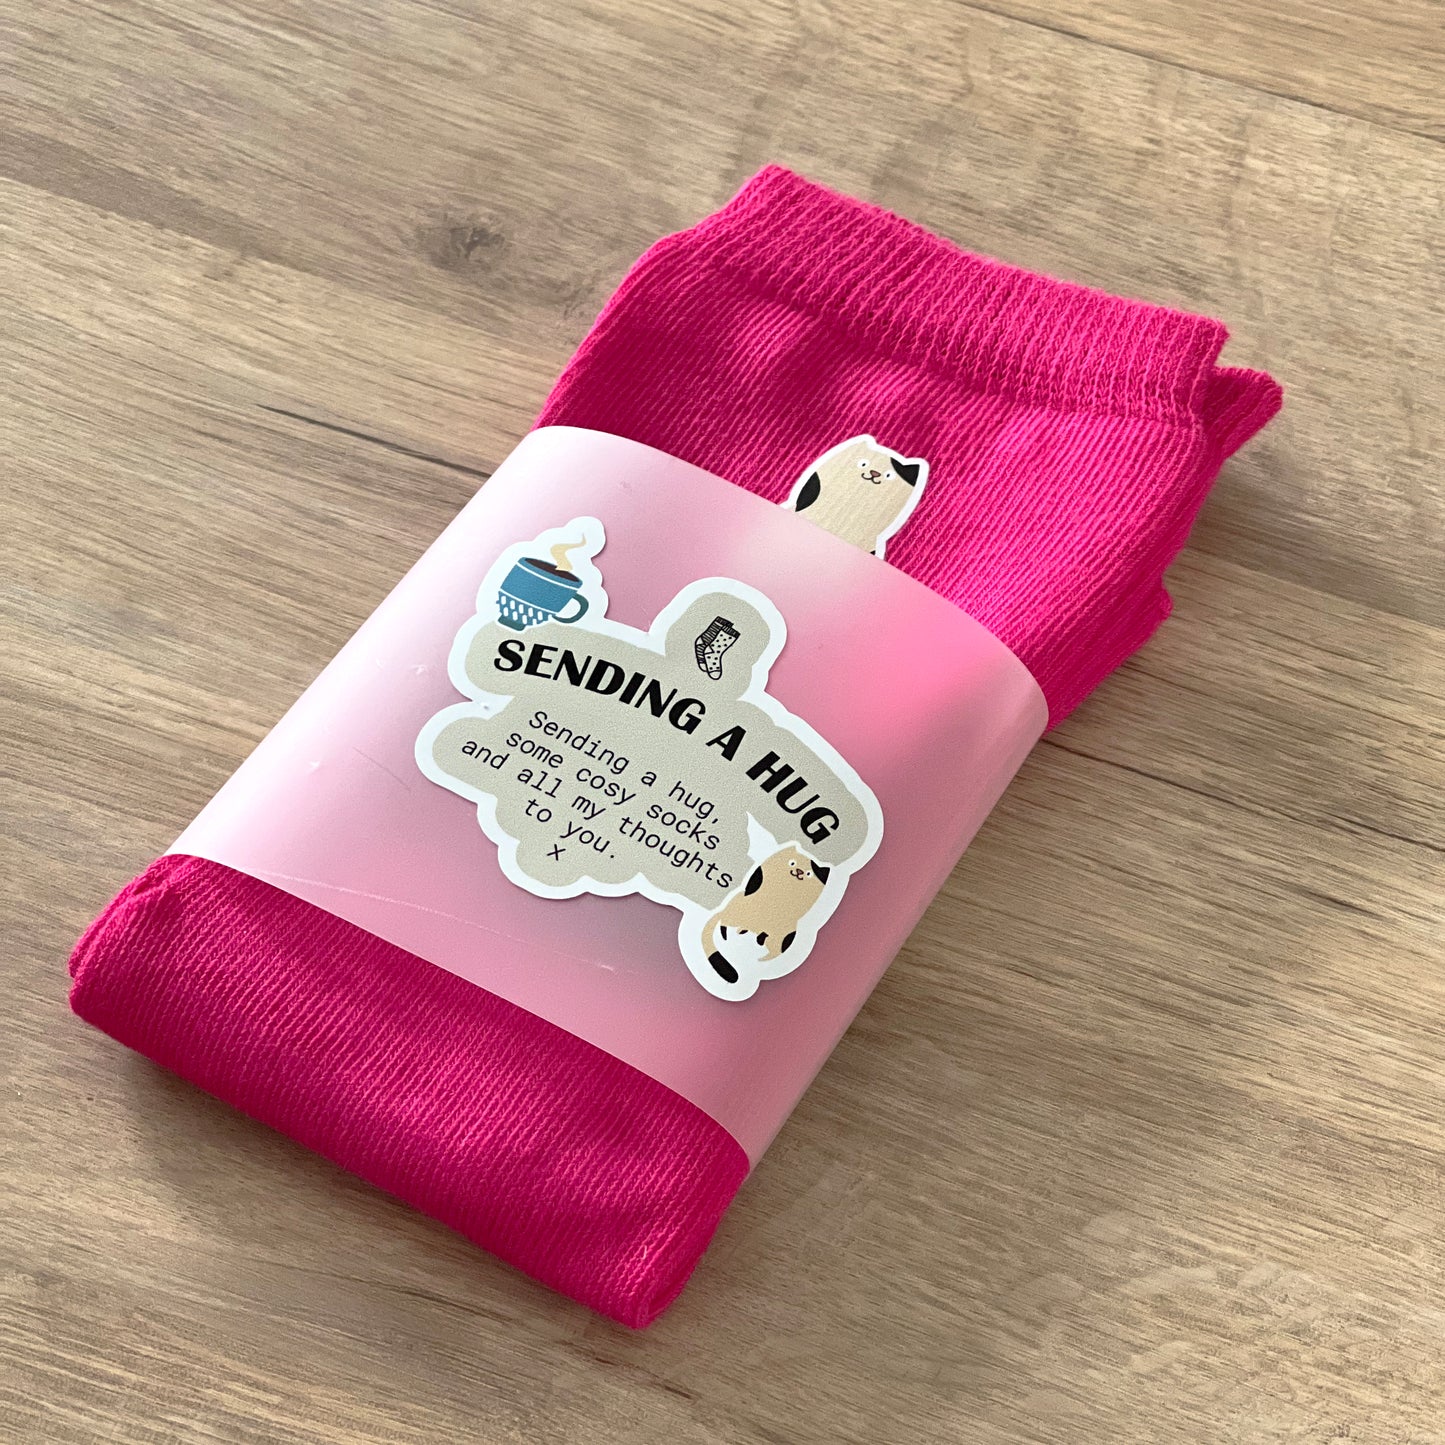 Thinking Of You Wrapped Pink Cotton Gift Socks